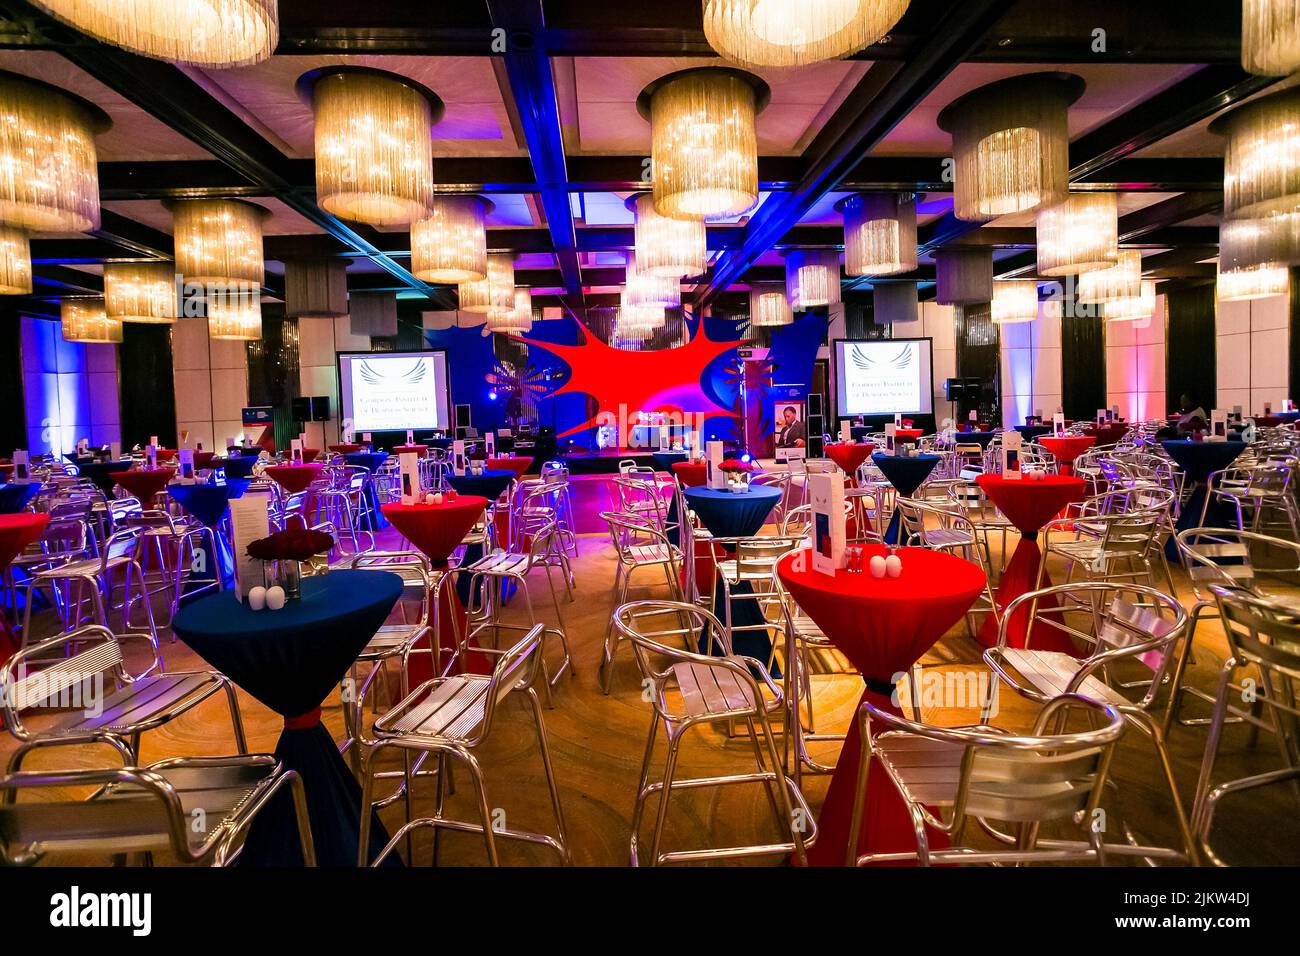 The Interior decorations and setup of corporate cocktail party event in Johannesburg, South Africa Stock Photo